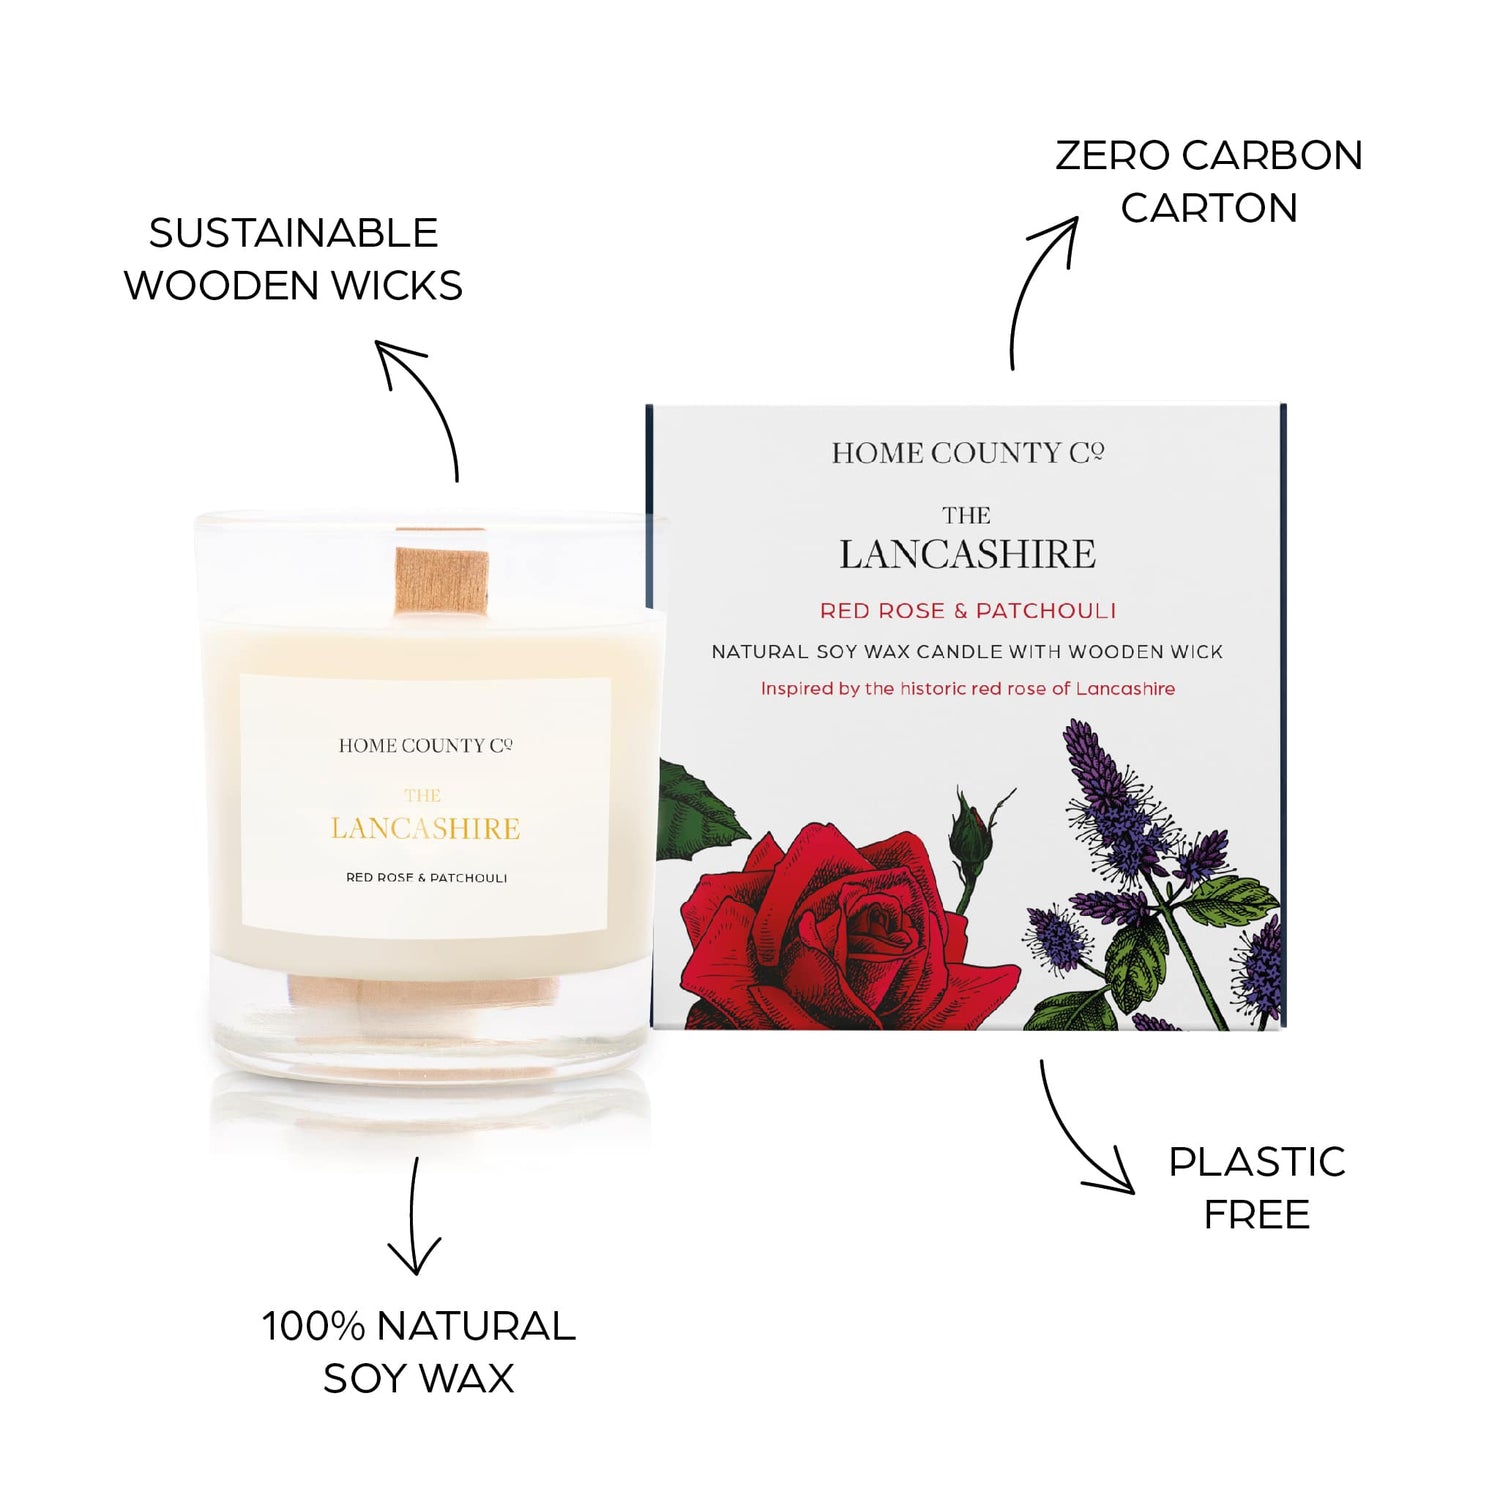 Sustainable candle credentials are shown around the red rose scented candle image - sustainable wooden wicks, zero carbon carton, 100% natural soy wax, plastic free